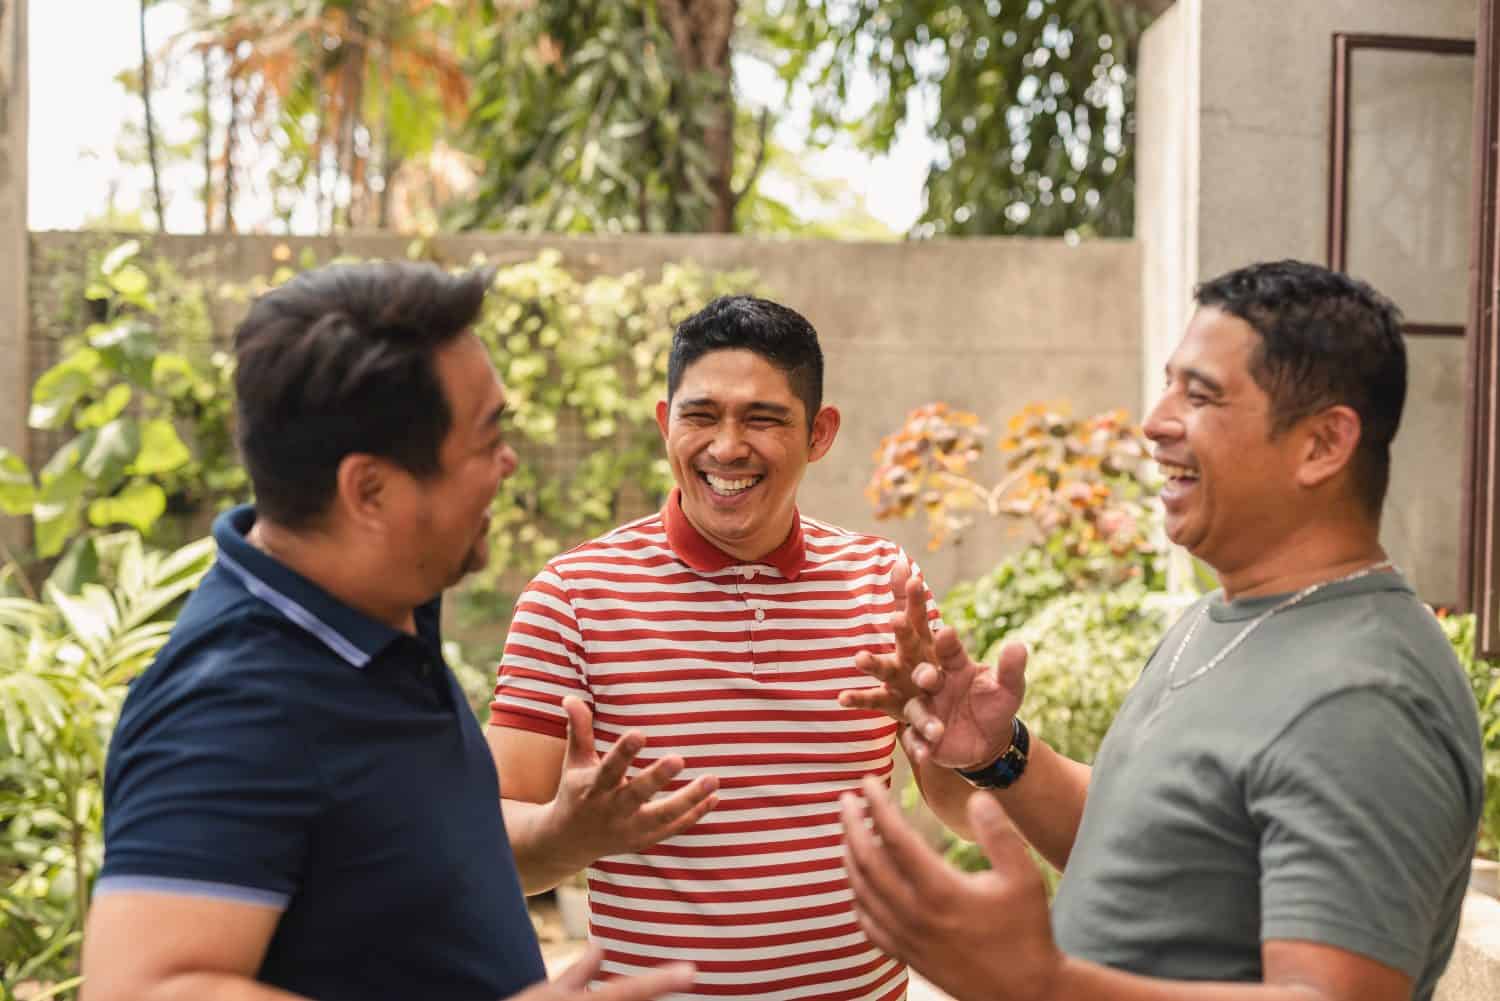 Asian men in forties sharing laughs and talks by the house, friendship and leisure concept